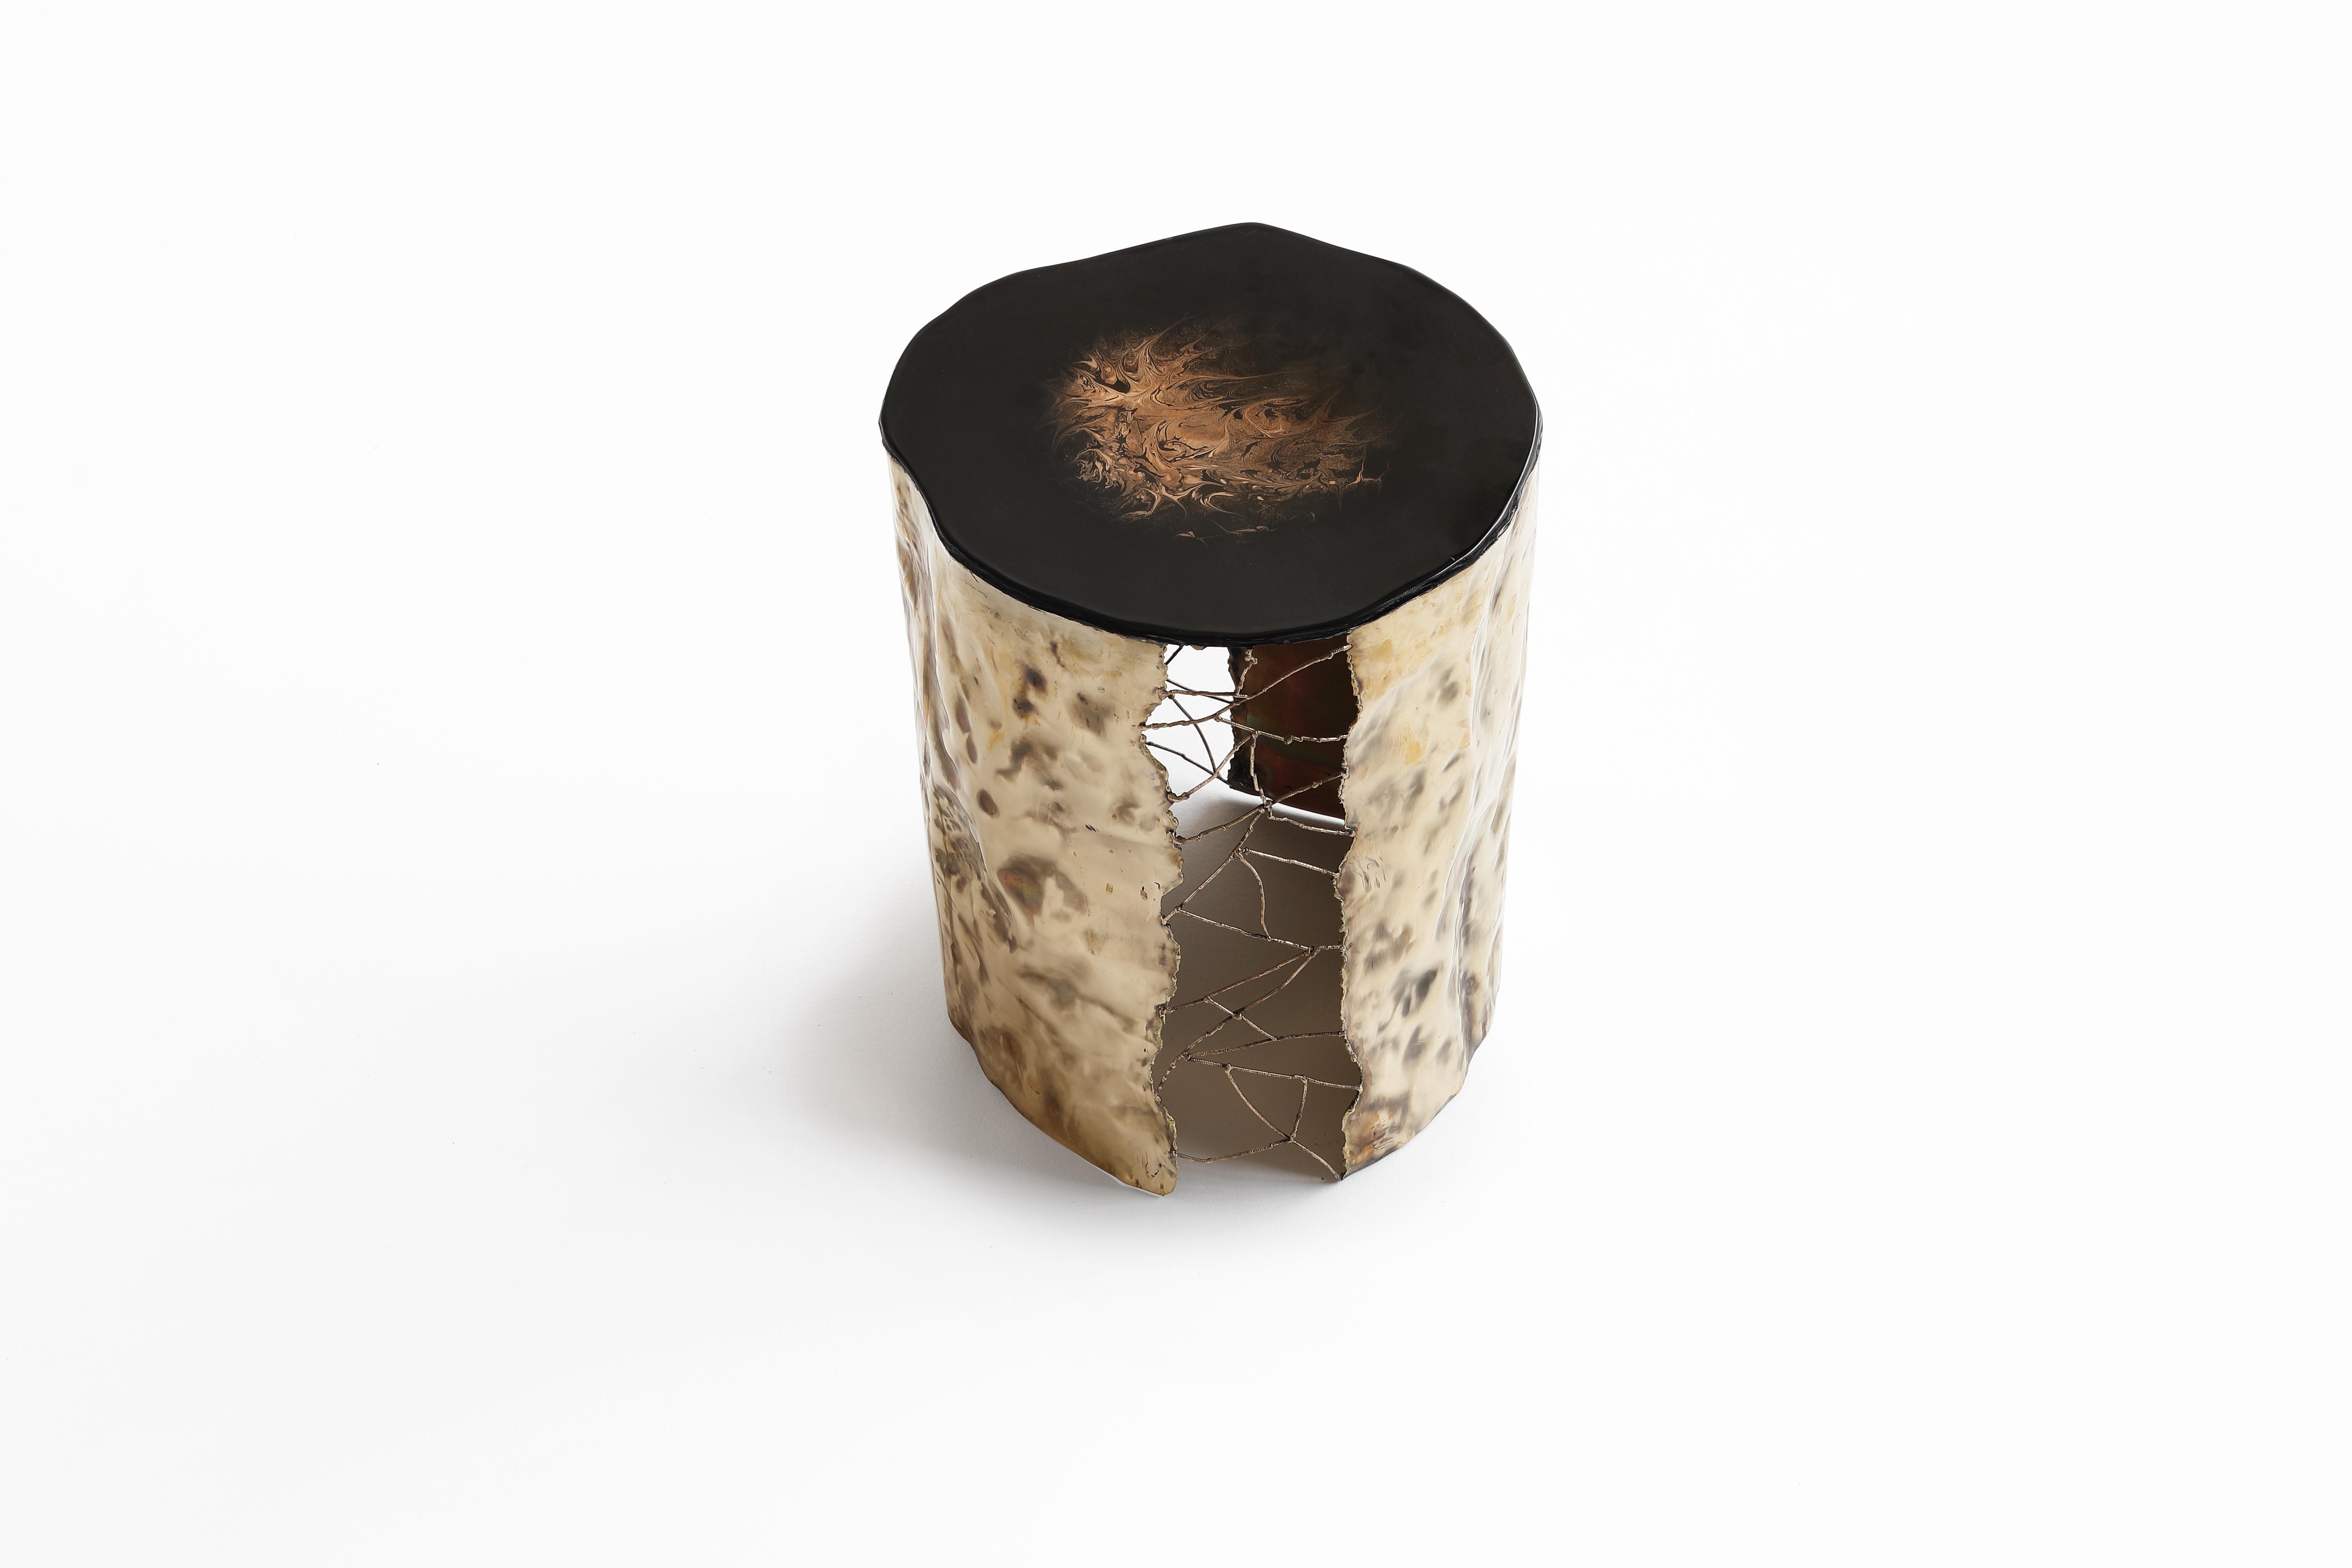 Brass hand-sculpted side table by Samuel Costantini.
Entirely handmade by the artist.
Title: golden waves.
Edition 15 + 2 AP
Measures: diameter 500 mm height 550 mm.
diameter 19.685, height 21.653 inches.

Time leaves its mark on everything.